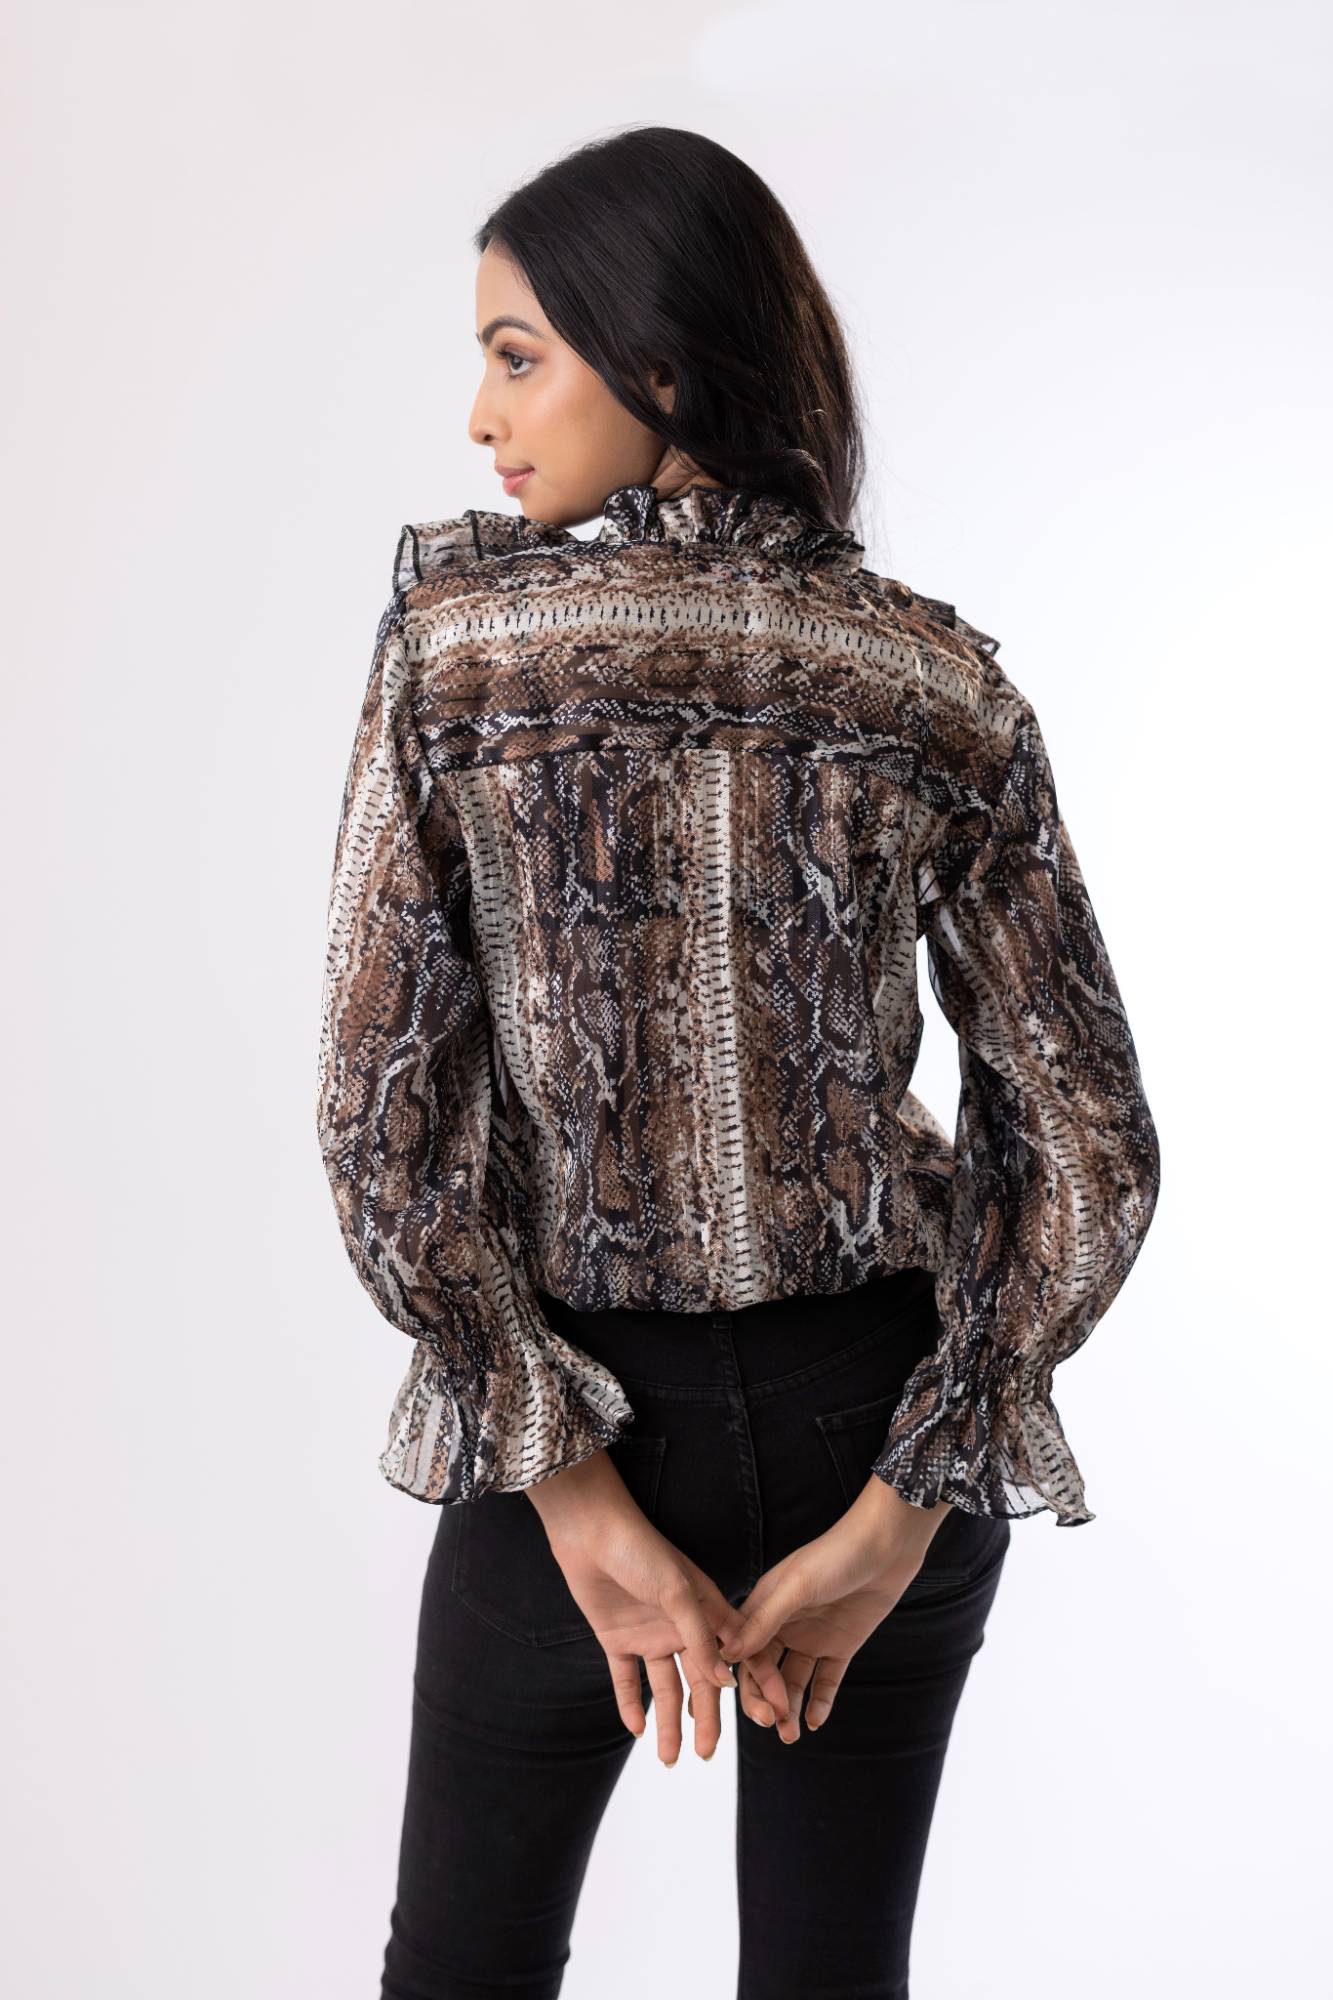 Ethereal Elegance Frill Shirt with Smokey Sleeves